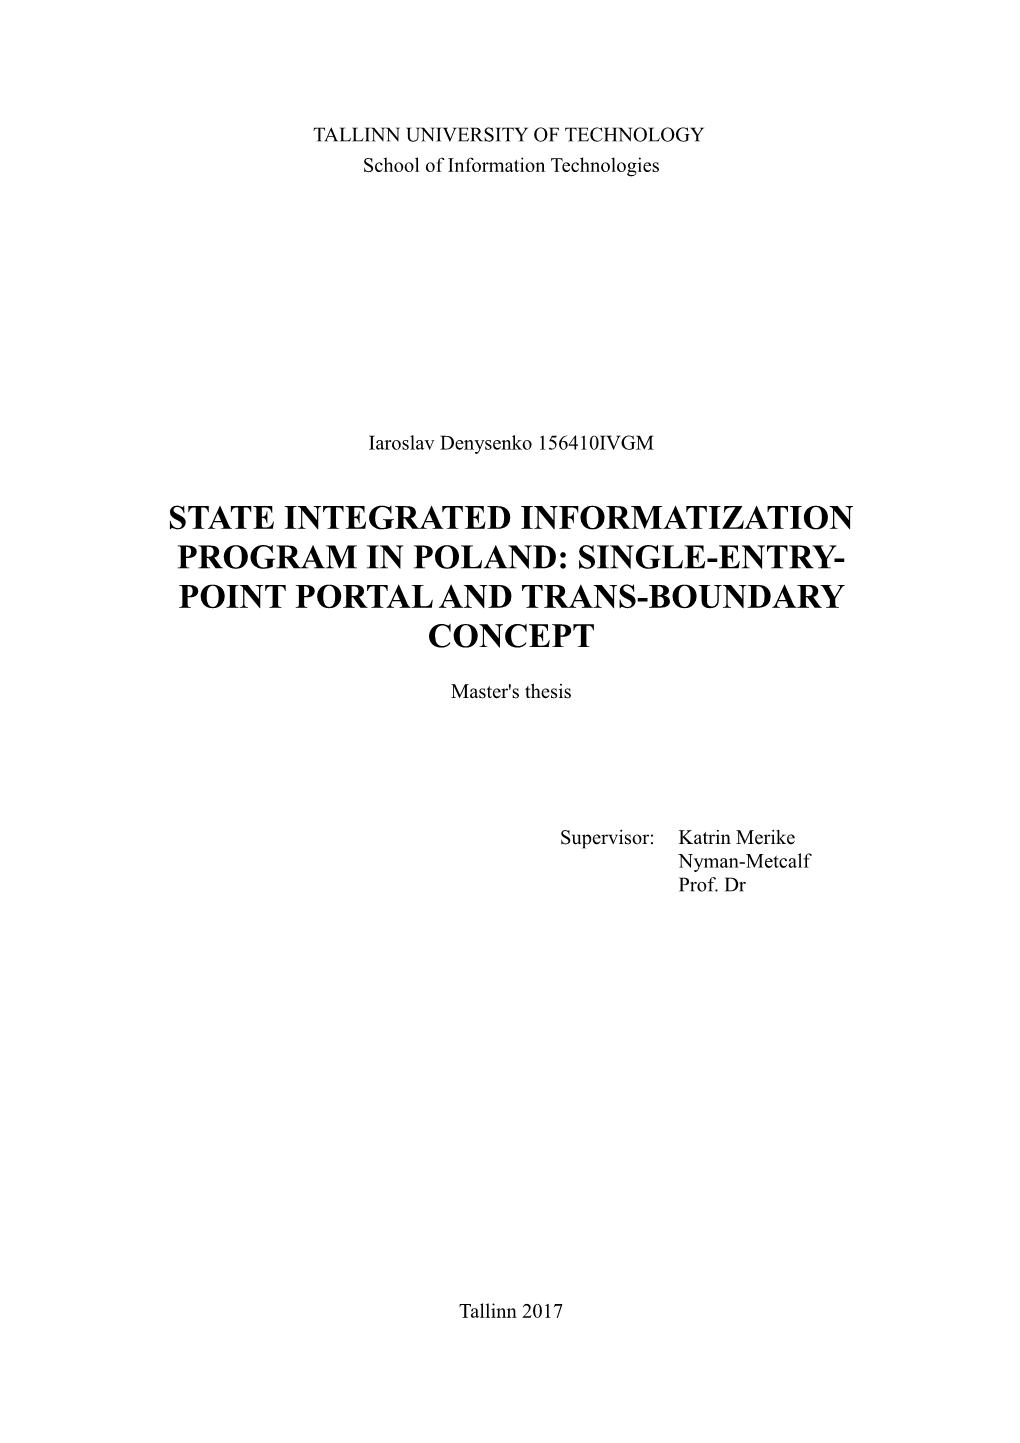 State Integrated Informatization Program in Poland: Single-Entry- Point Portal and Trans-Boundary Concept